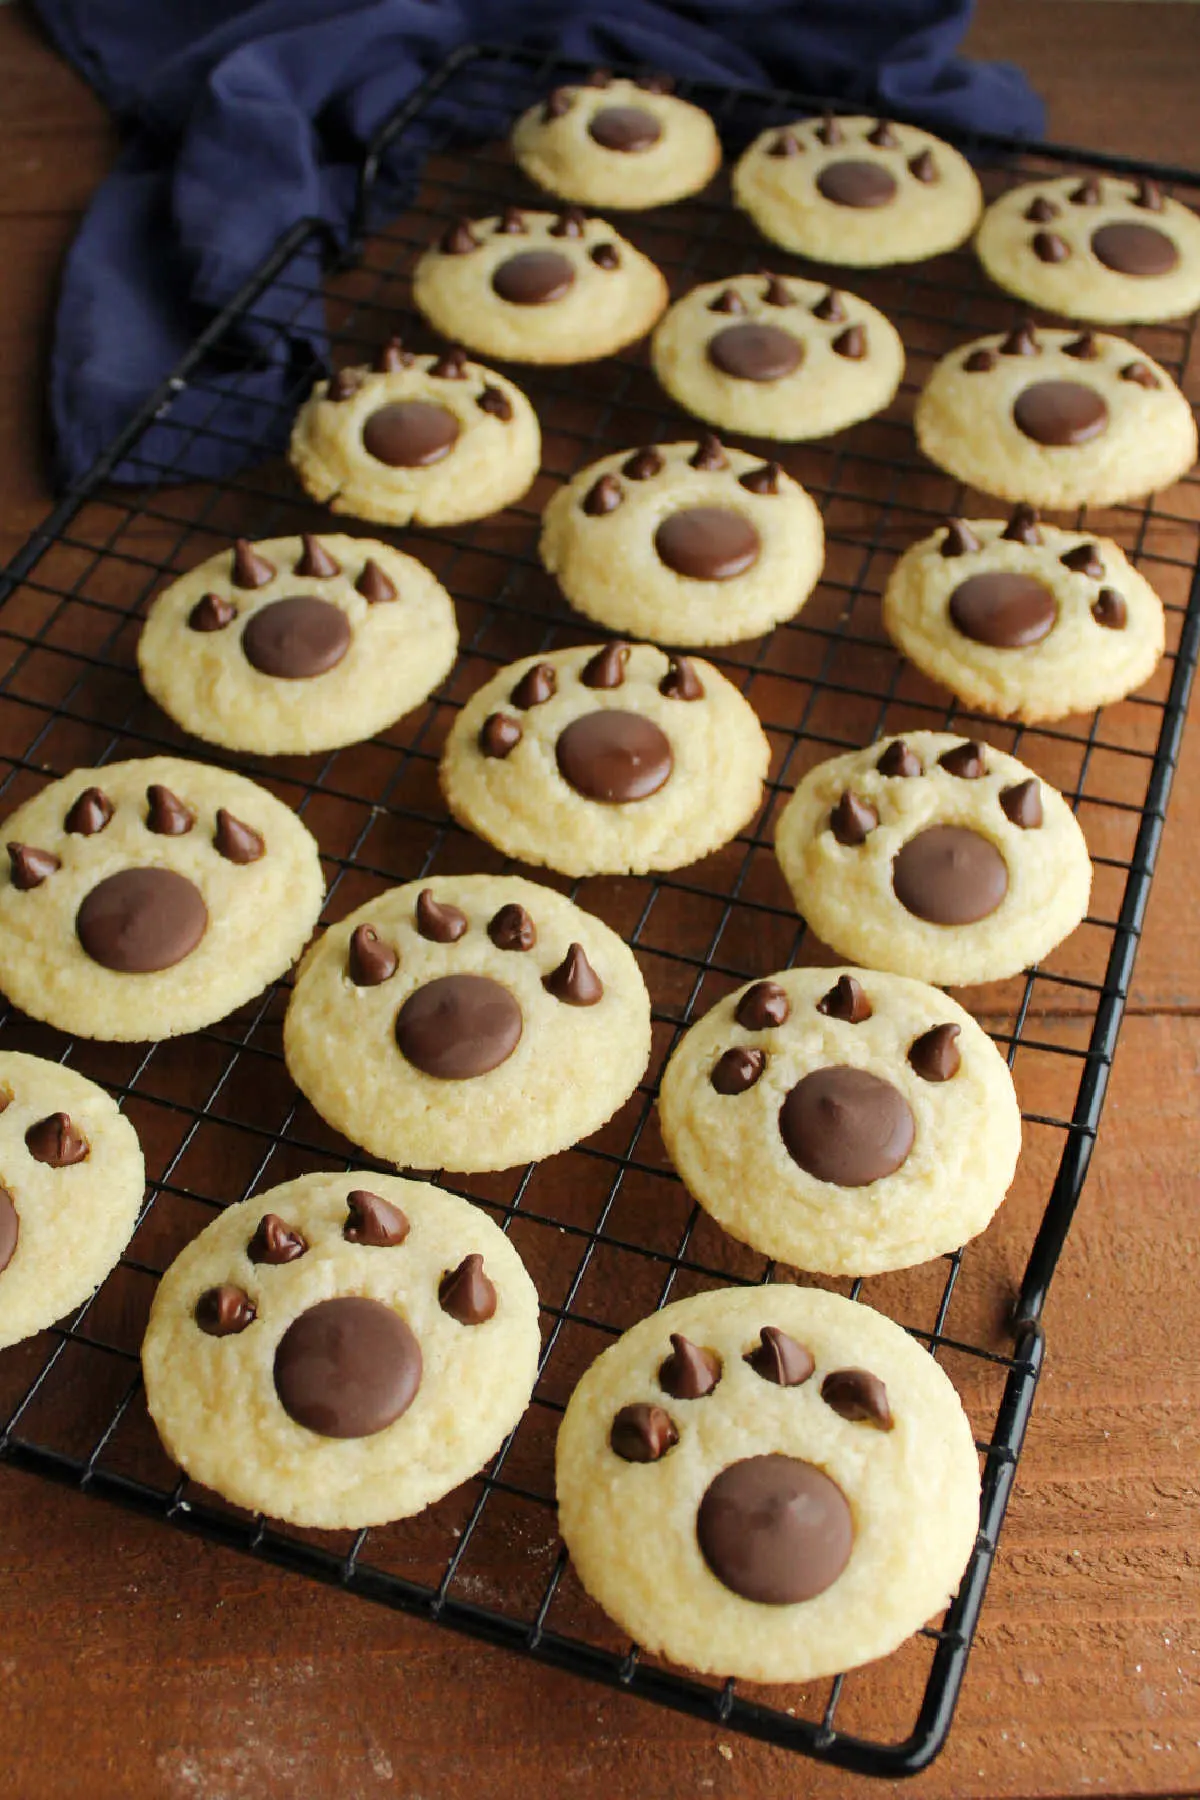 Paw print cookies on wire cooling rack.